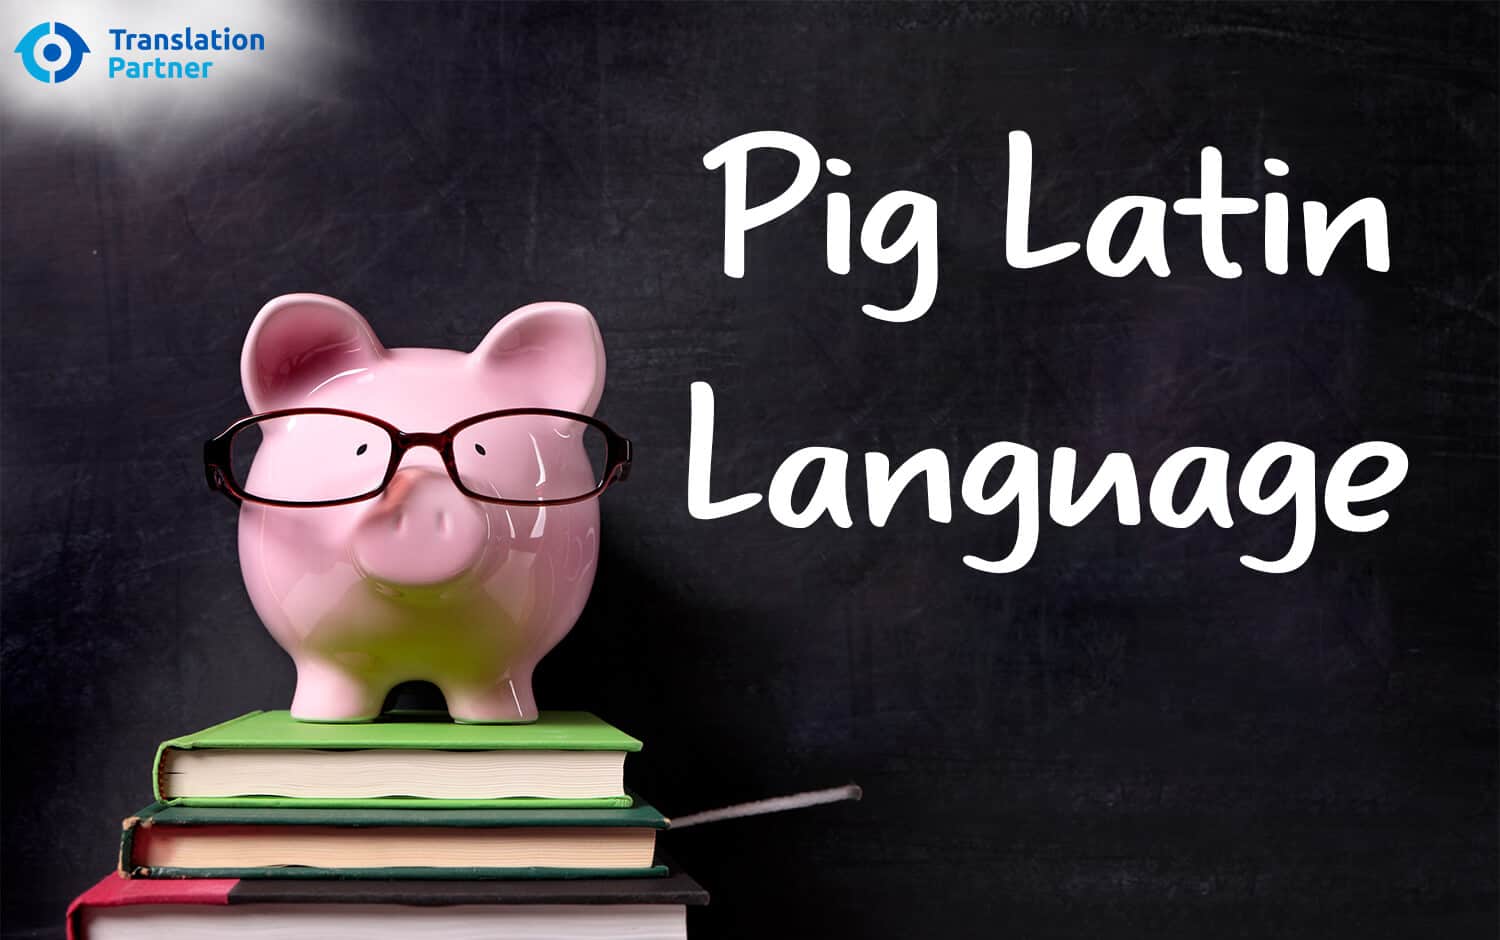 Fun Facts About the Pig Latin Language 